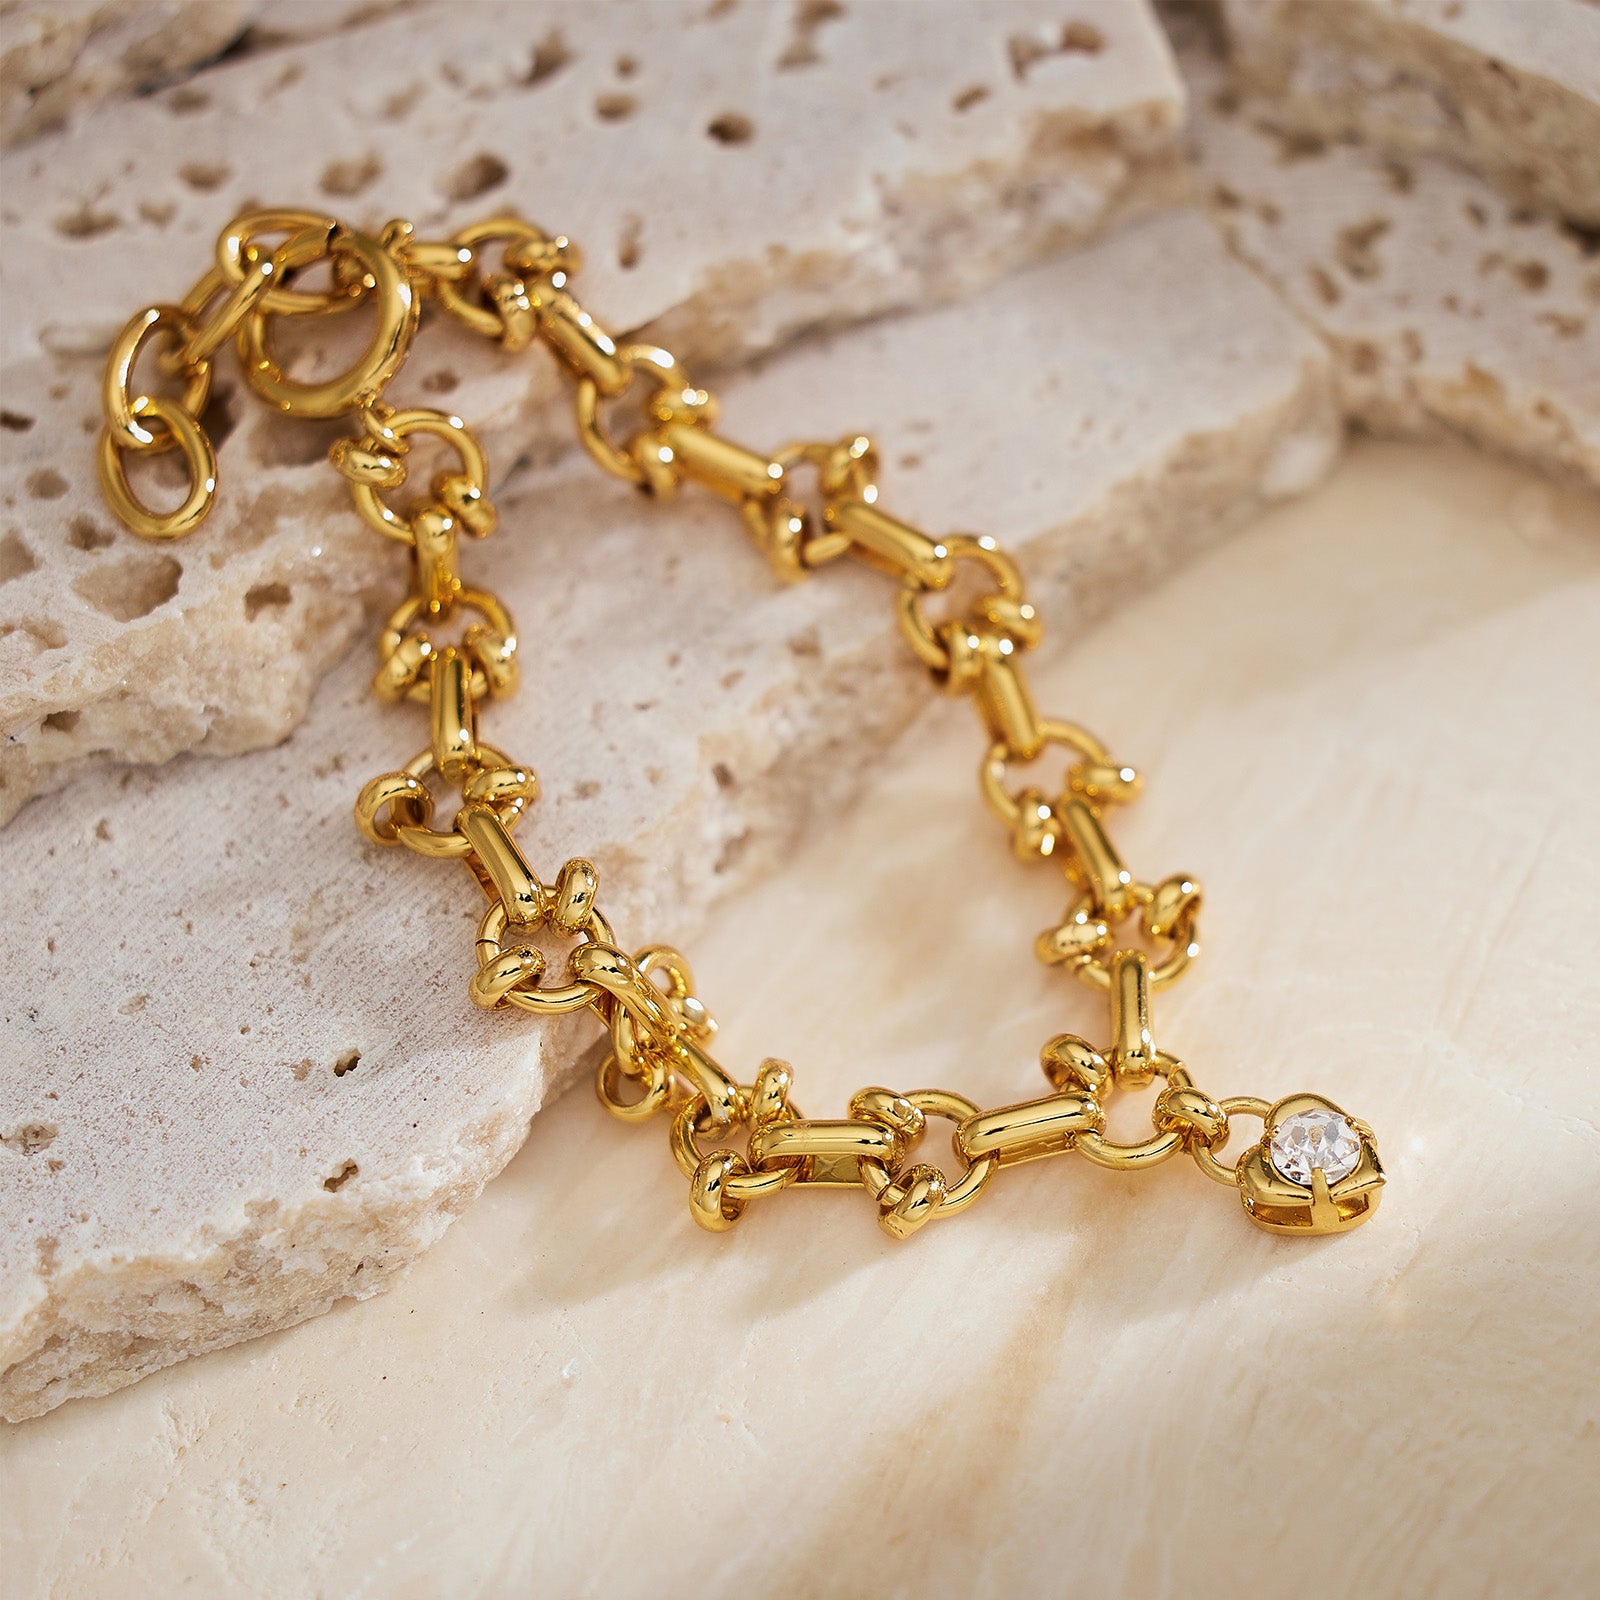 Gold Diamond Heart Bracelet, embodying gilded romance, this bracelet features a chain of intricately crafted hearts adorned with diamonds, creating a stunning and romantic accessory for expressing love and style